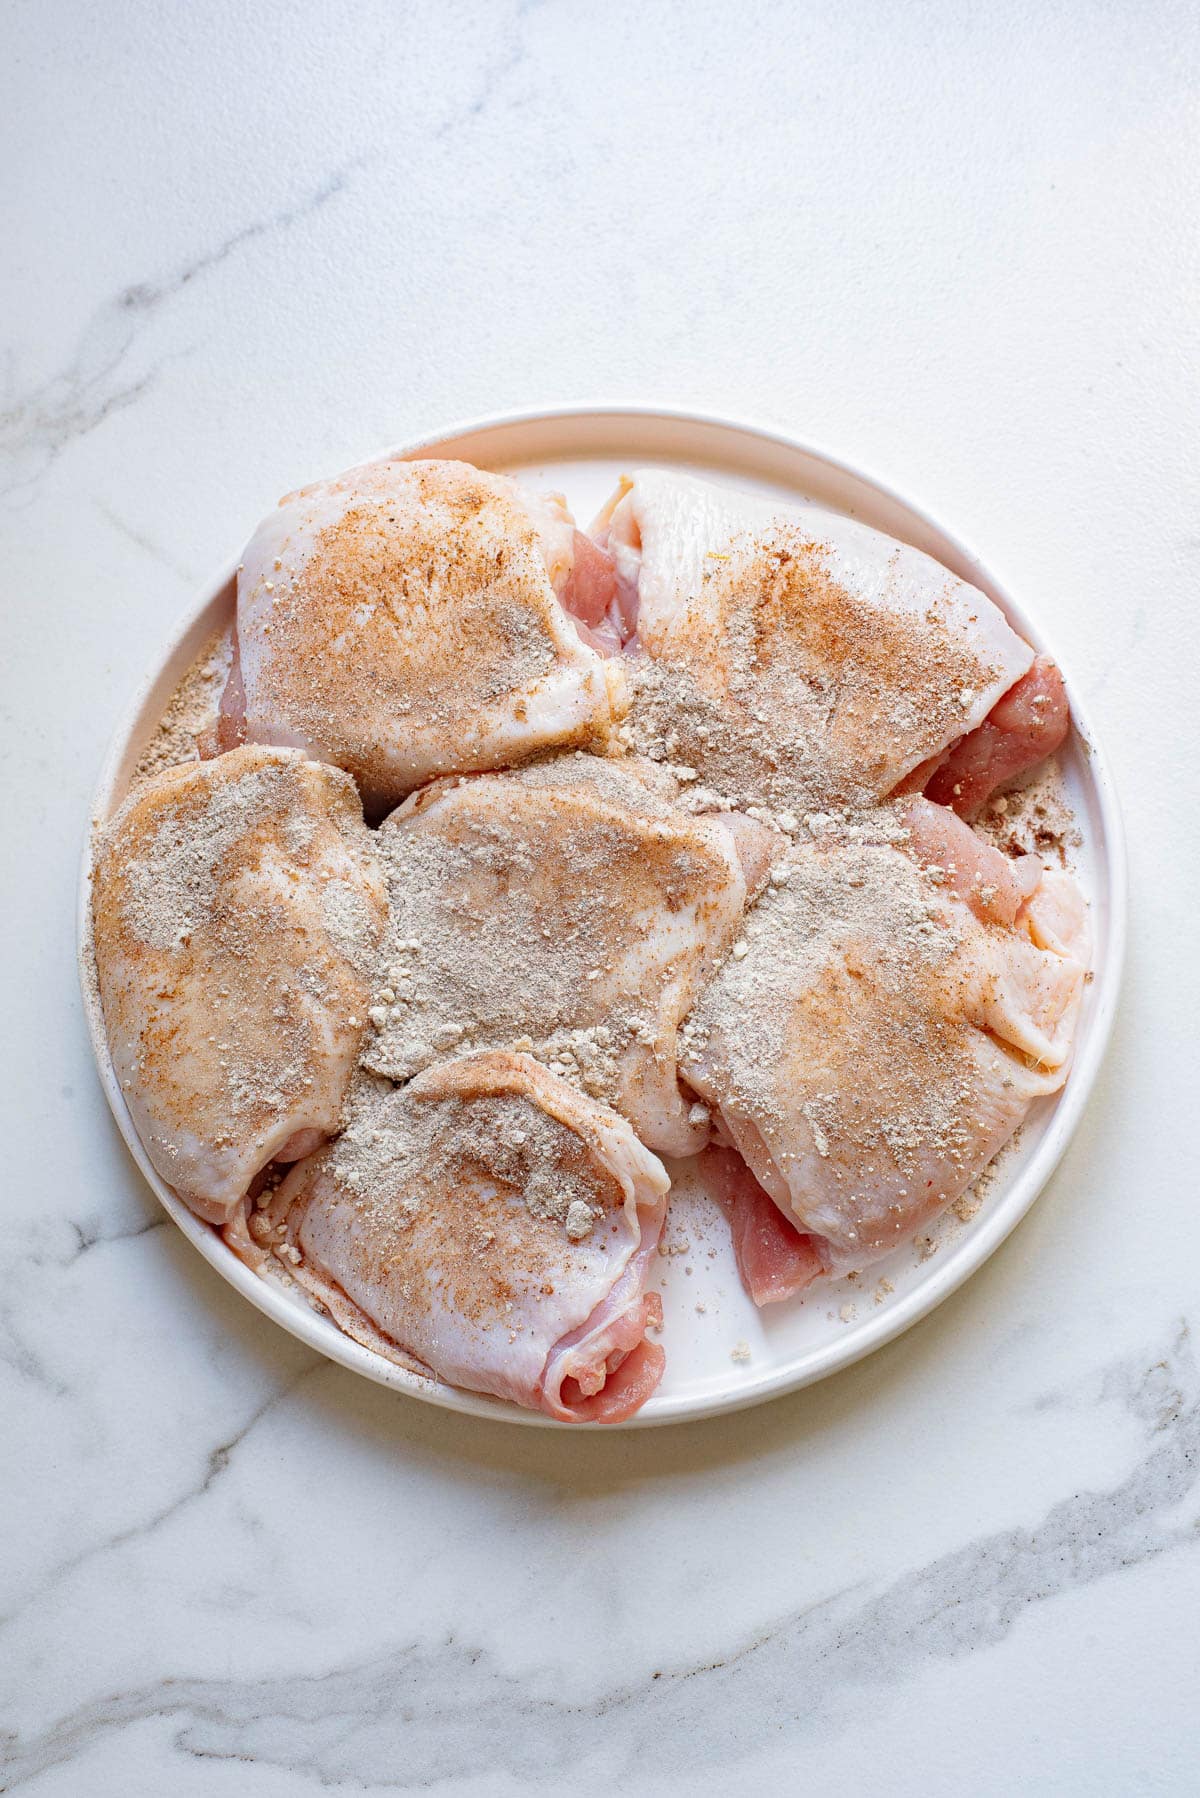 Raw chicken with seasoning in a white bowl.